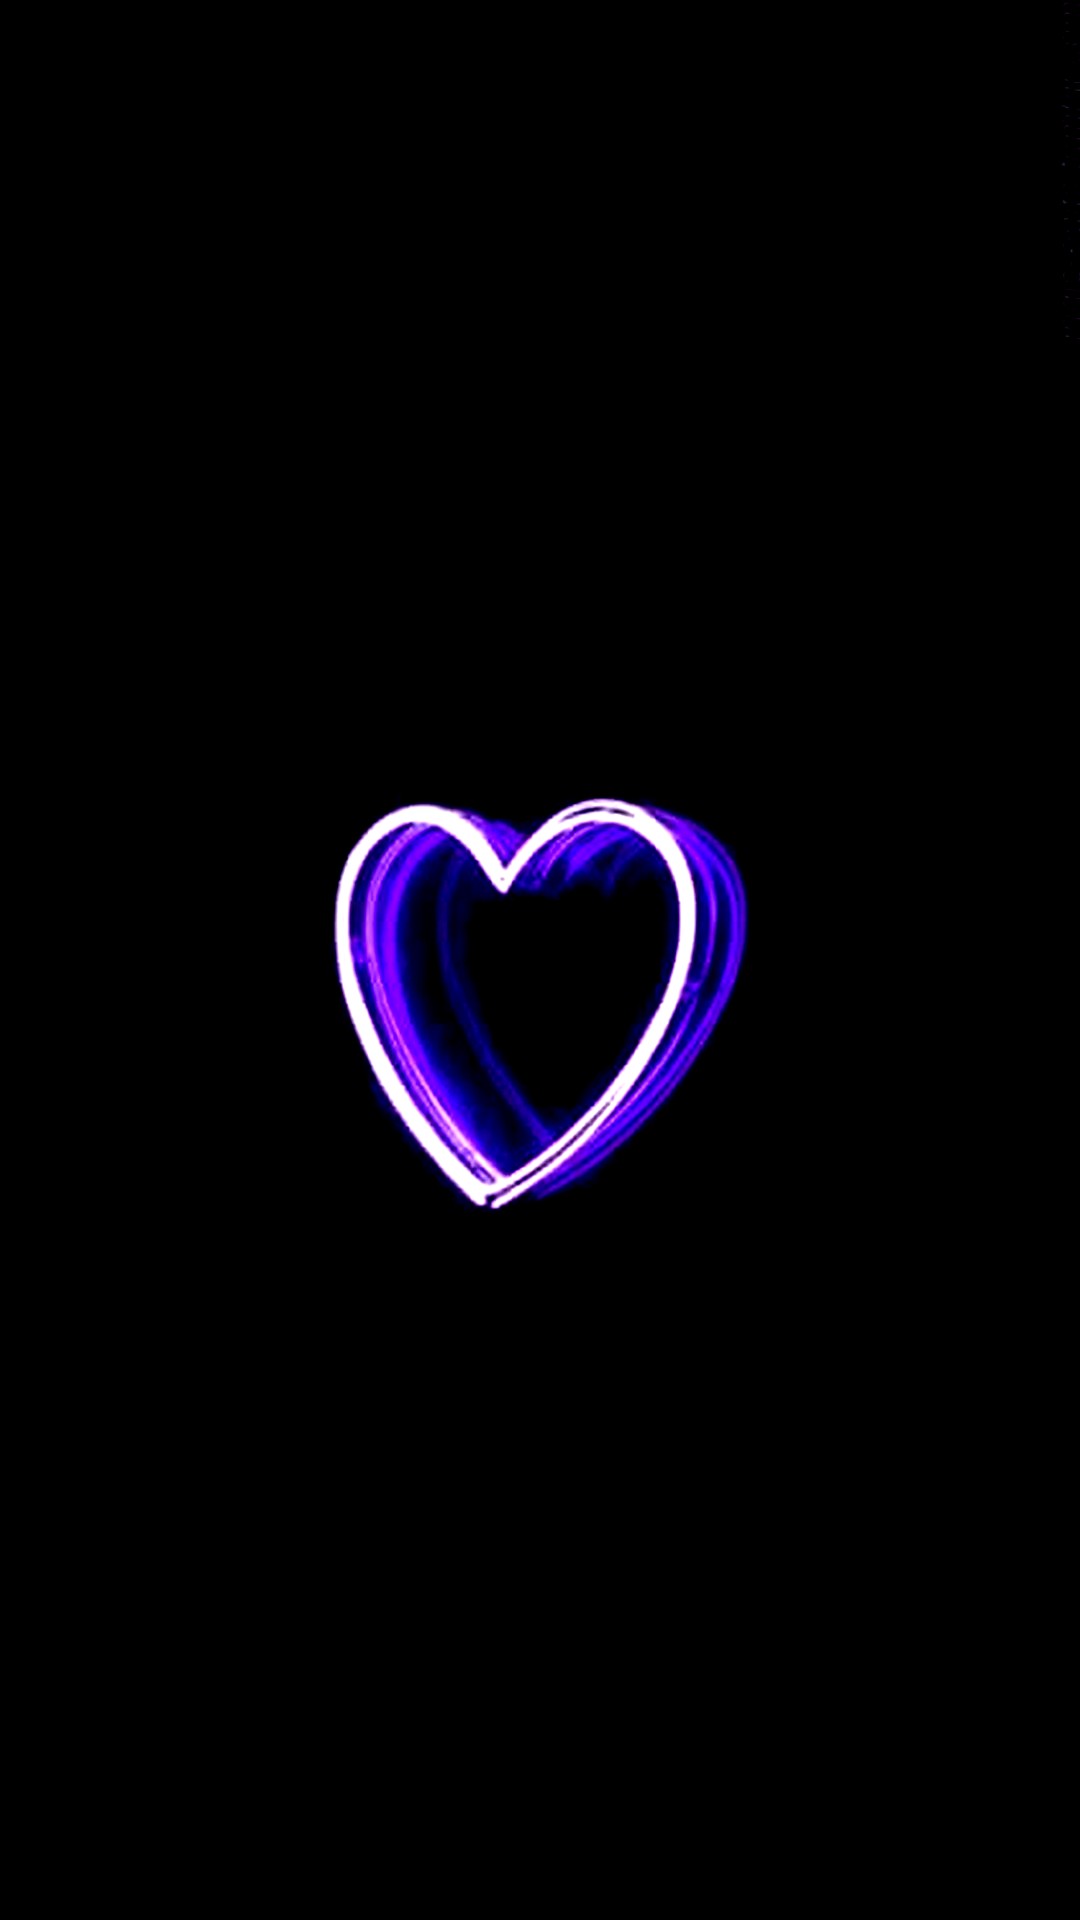 Neon Purple iPhone Home Screen Wallpaper With high-resolution 1080X1920 pixel. You can set as wallpaper for Apple iPhone X, XS Max, XR, 8, 7, 6, SE, iPad. Enjoy and share your favorite HD wallpapers and background images